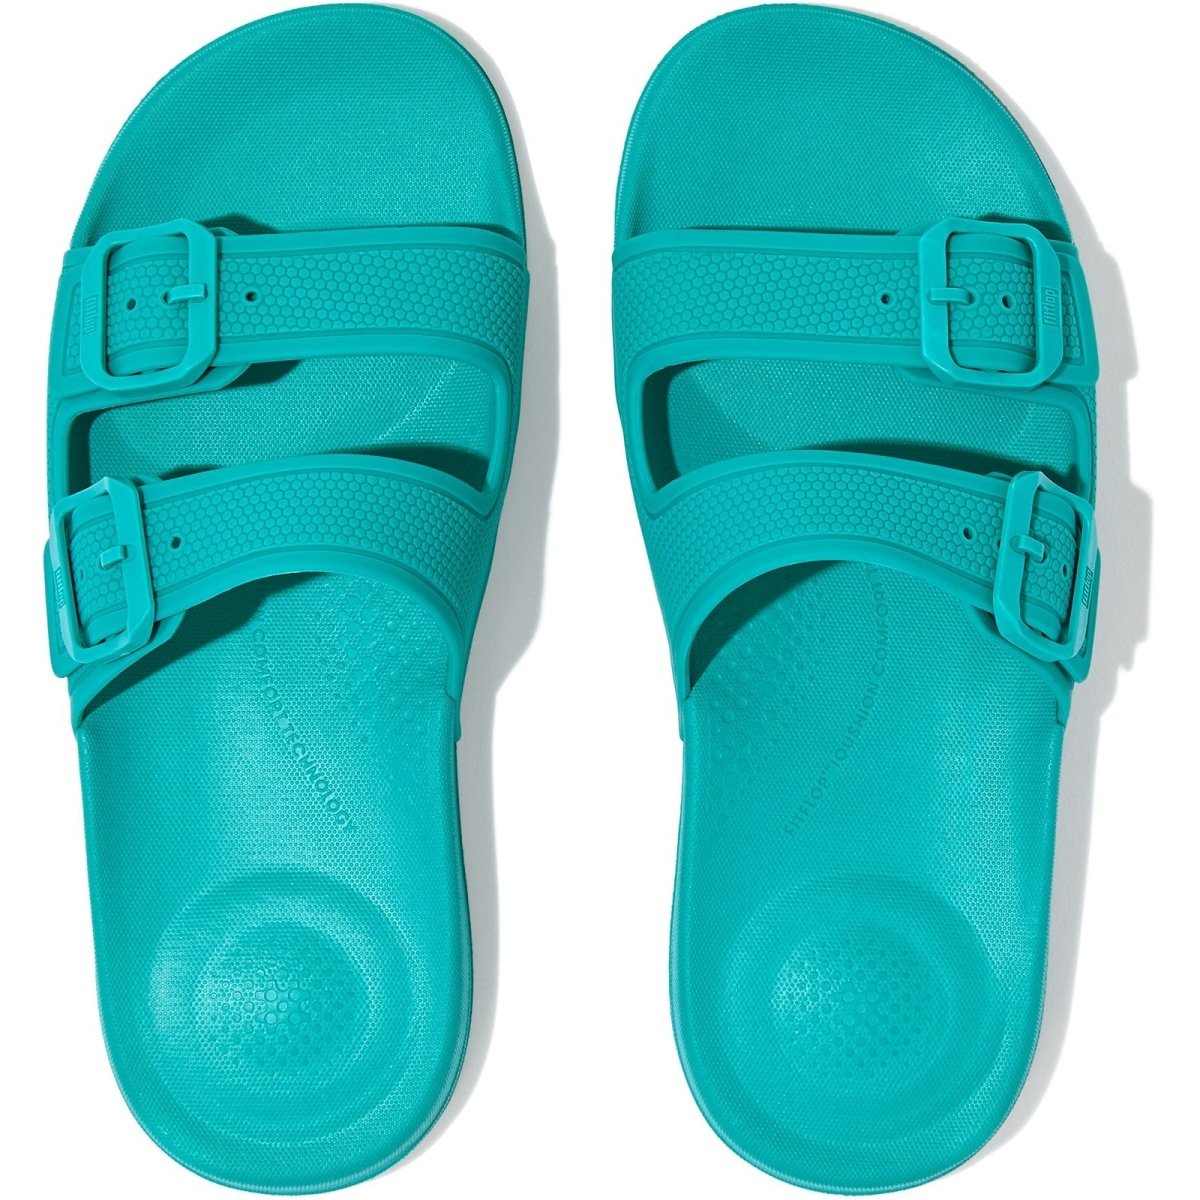 Fitflop iQUSHION Ladies Summer Beach Mule Sliders - Shoe Store Direct